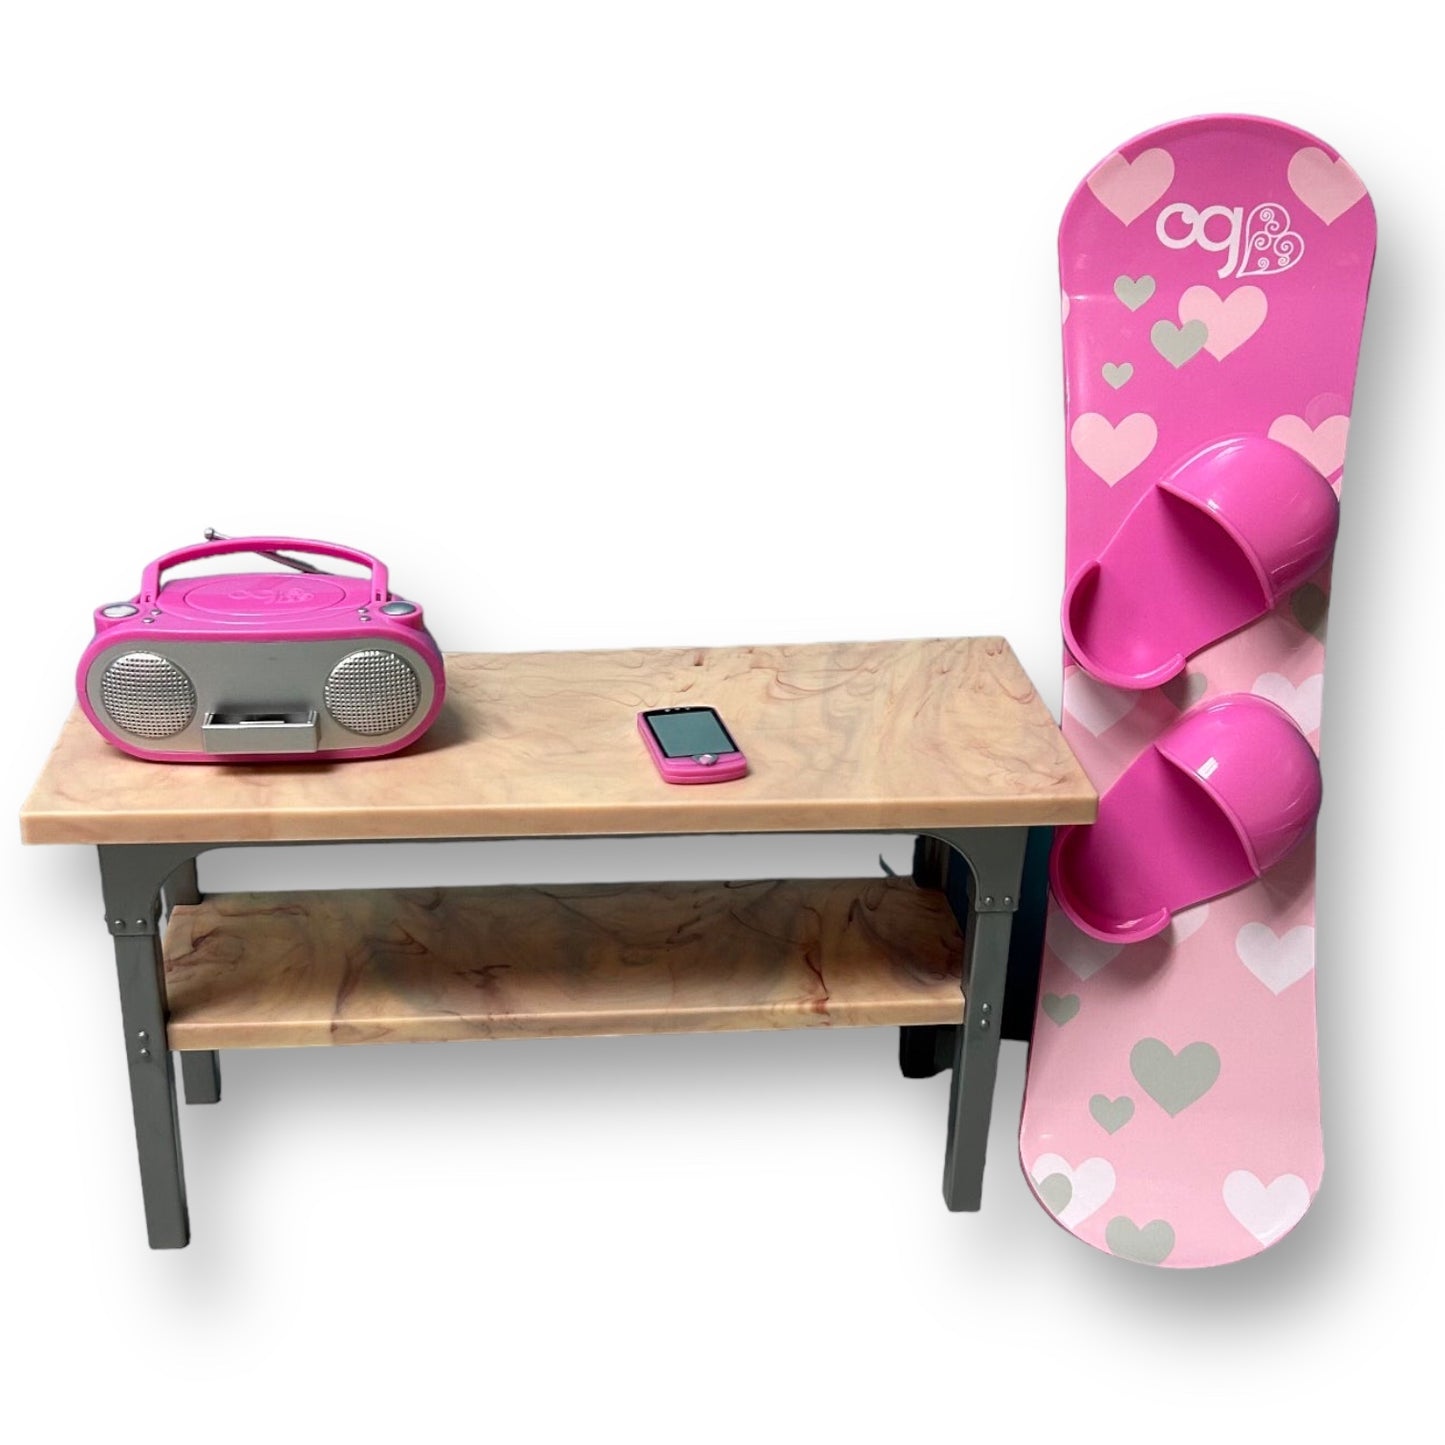 18" Doll Snowboard, Cell Phone, Boombox, & Desk Bundle Bag for American Girl